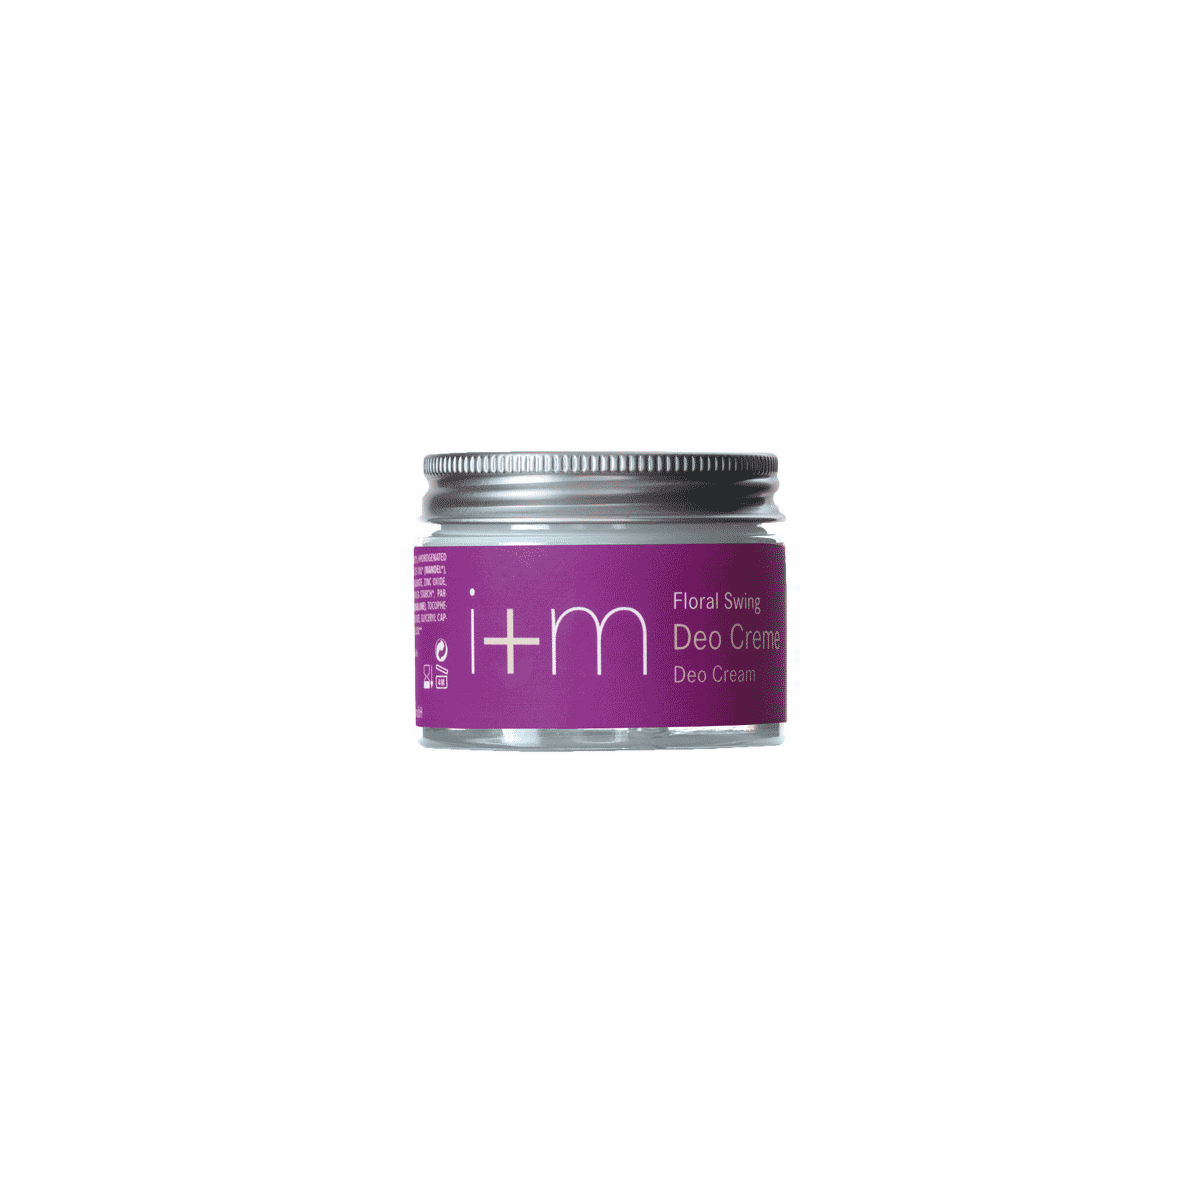 i+m - Floral Swing Deo Creme - 30 ml